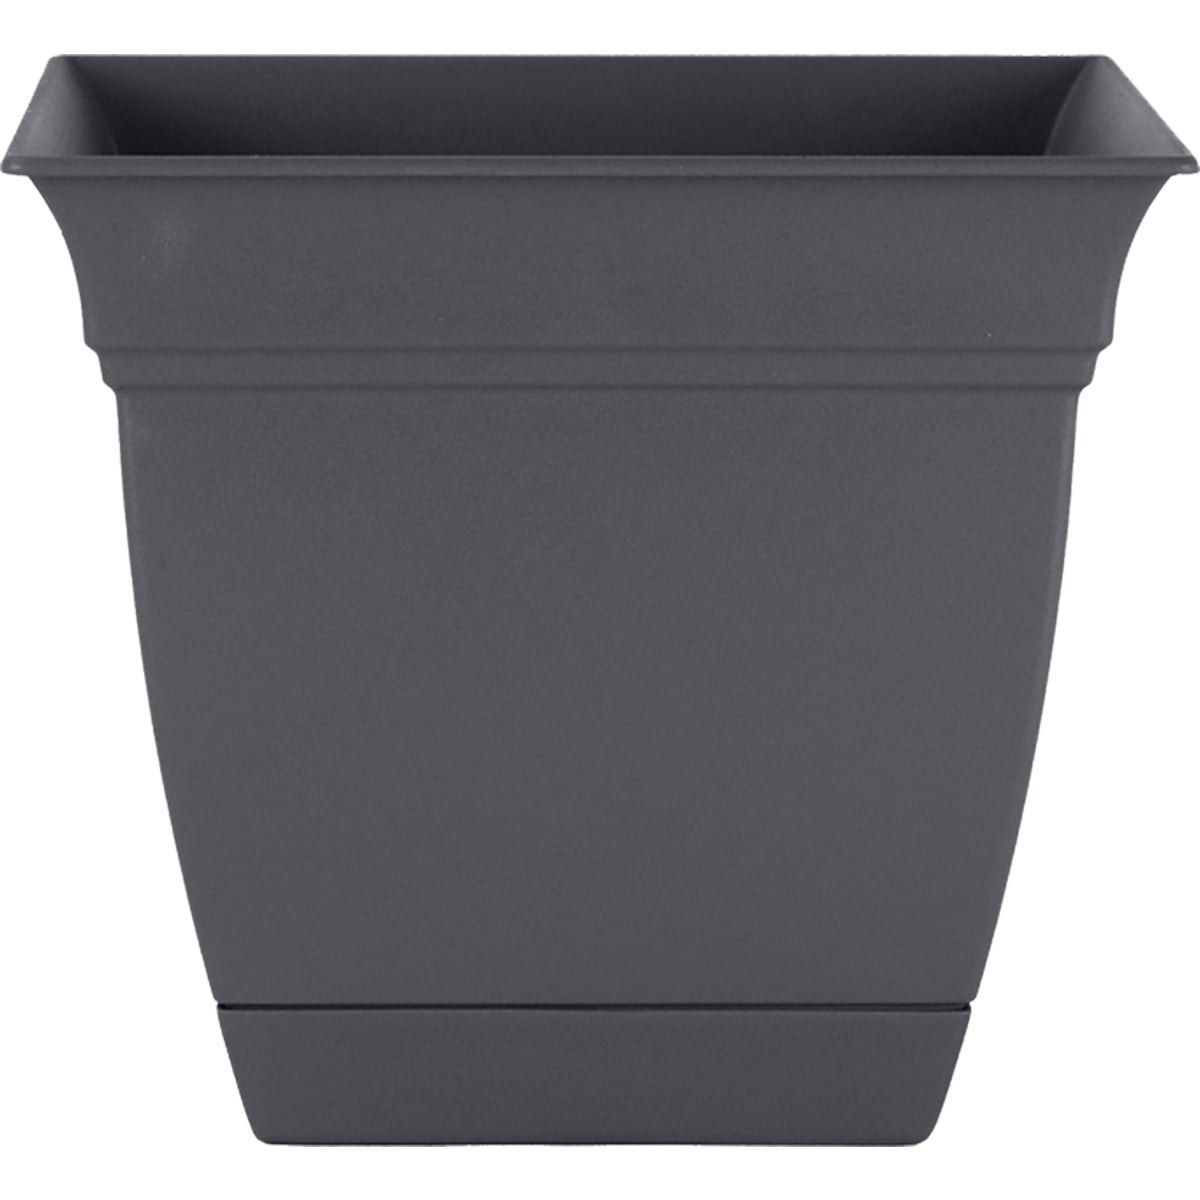 HC Companies Eclipse 10 In. x 10 In. x 8.75 In. Resin Warm Gray Planter